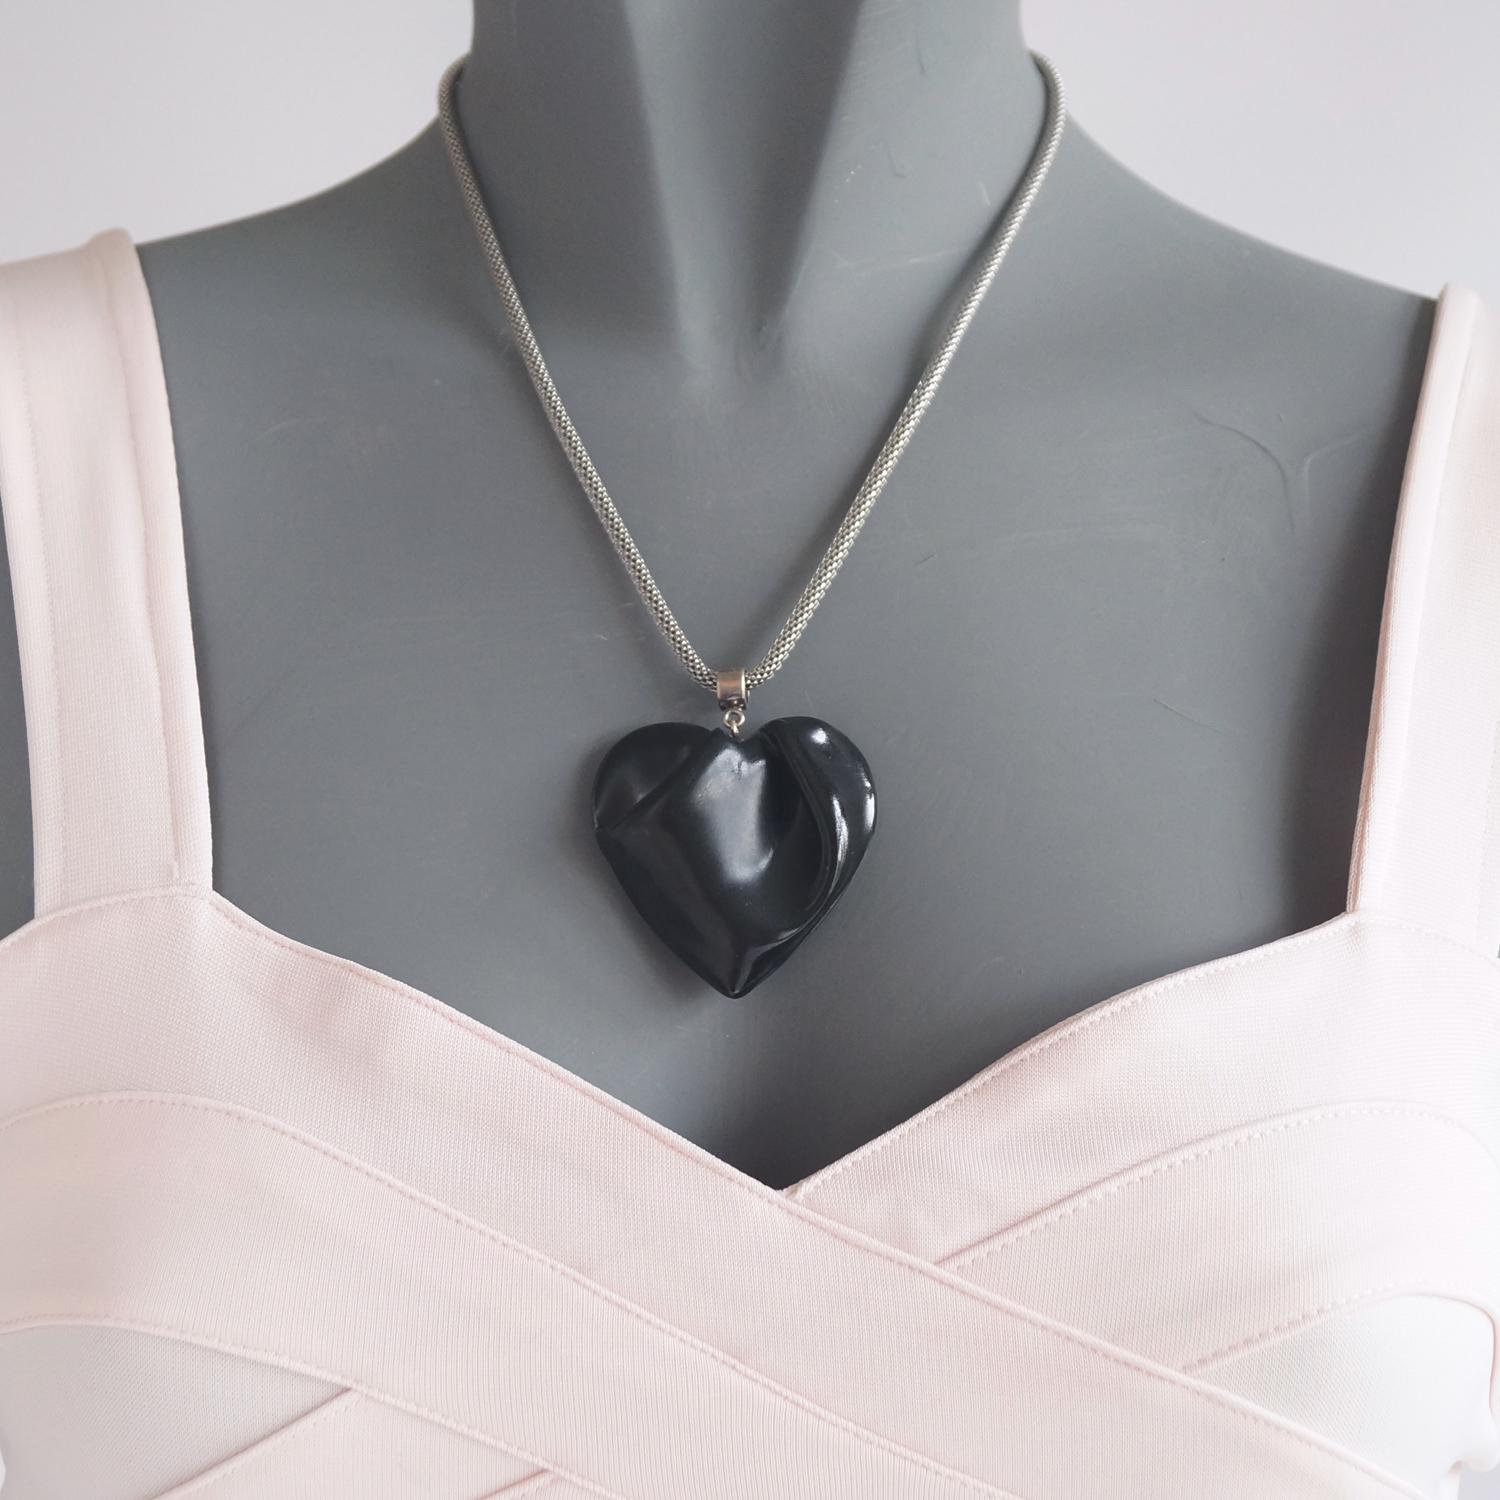 DRAPED heart necklace, large black porcelain, stainless steel chain